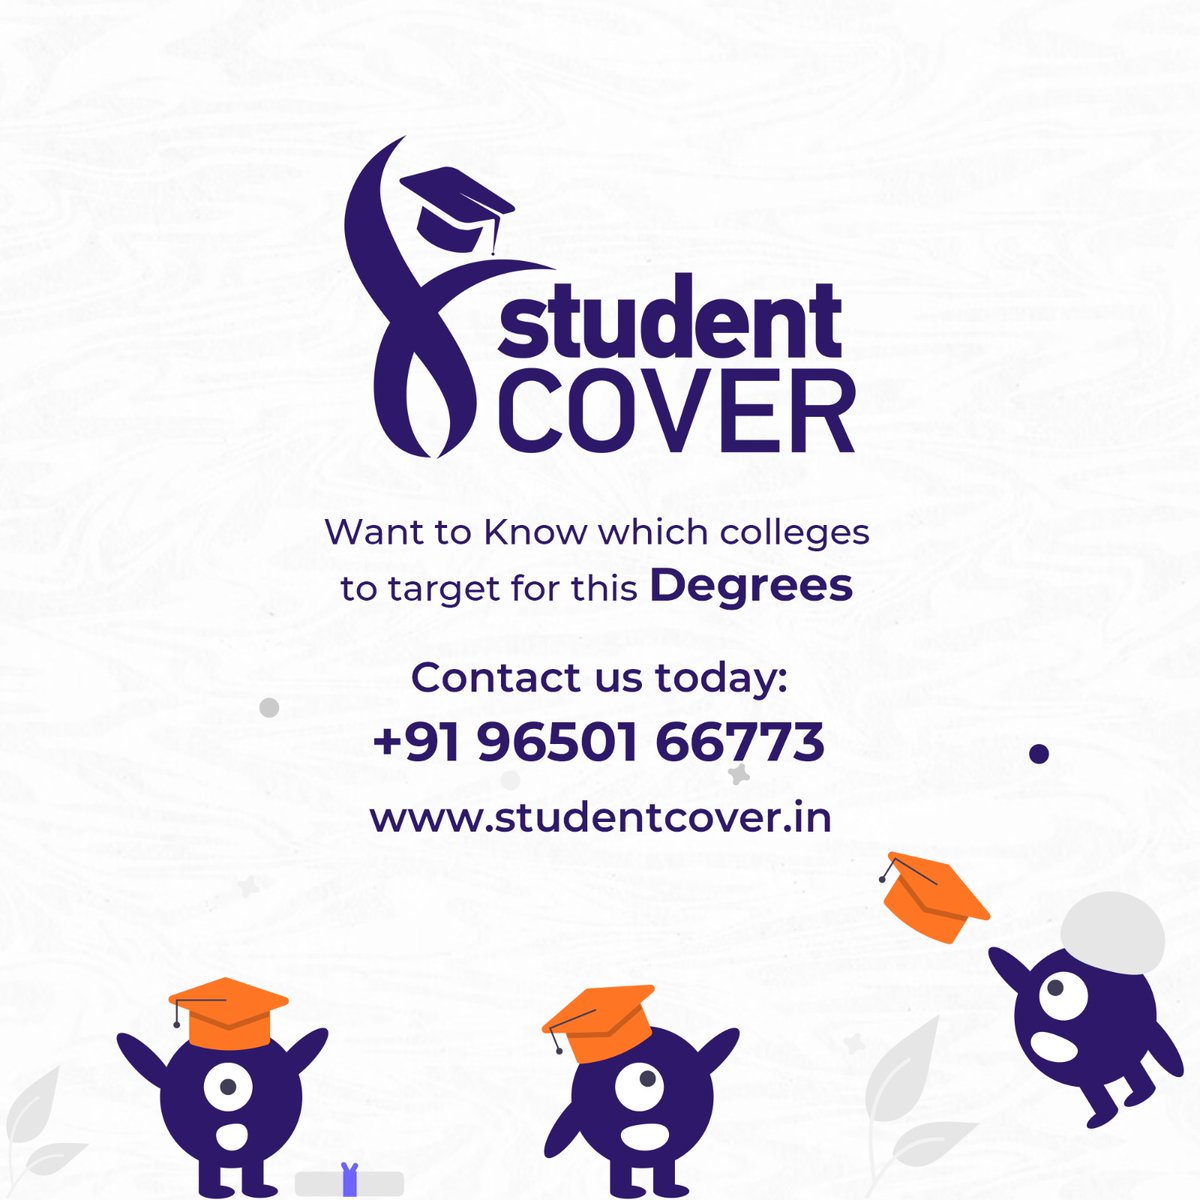 Student_Cover tweet picture